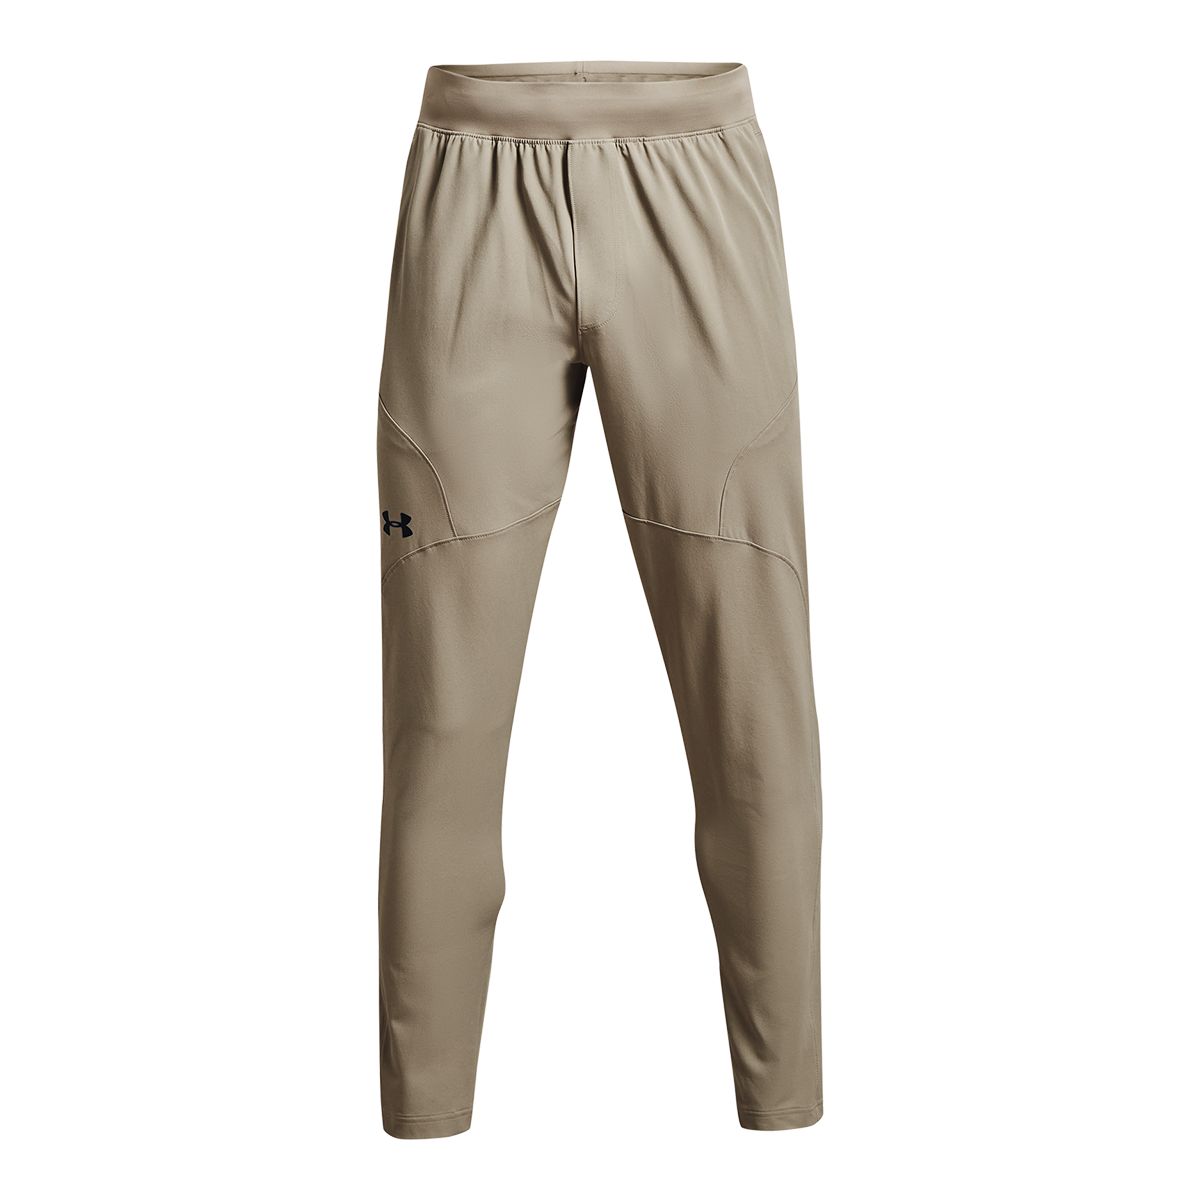 Under Armour Men's Stretch Woven Utility Pants, Water-Repellant, Tapered,  Cuffed